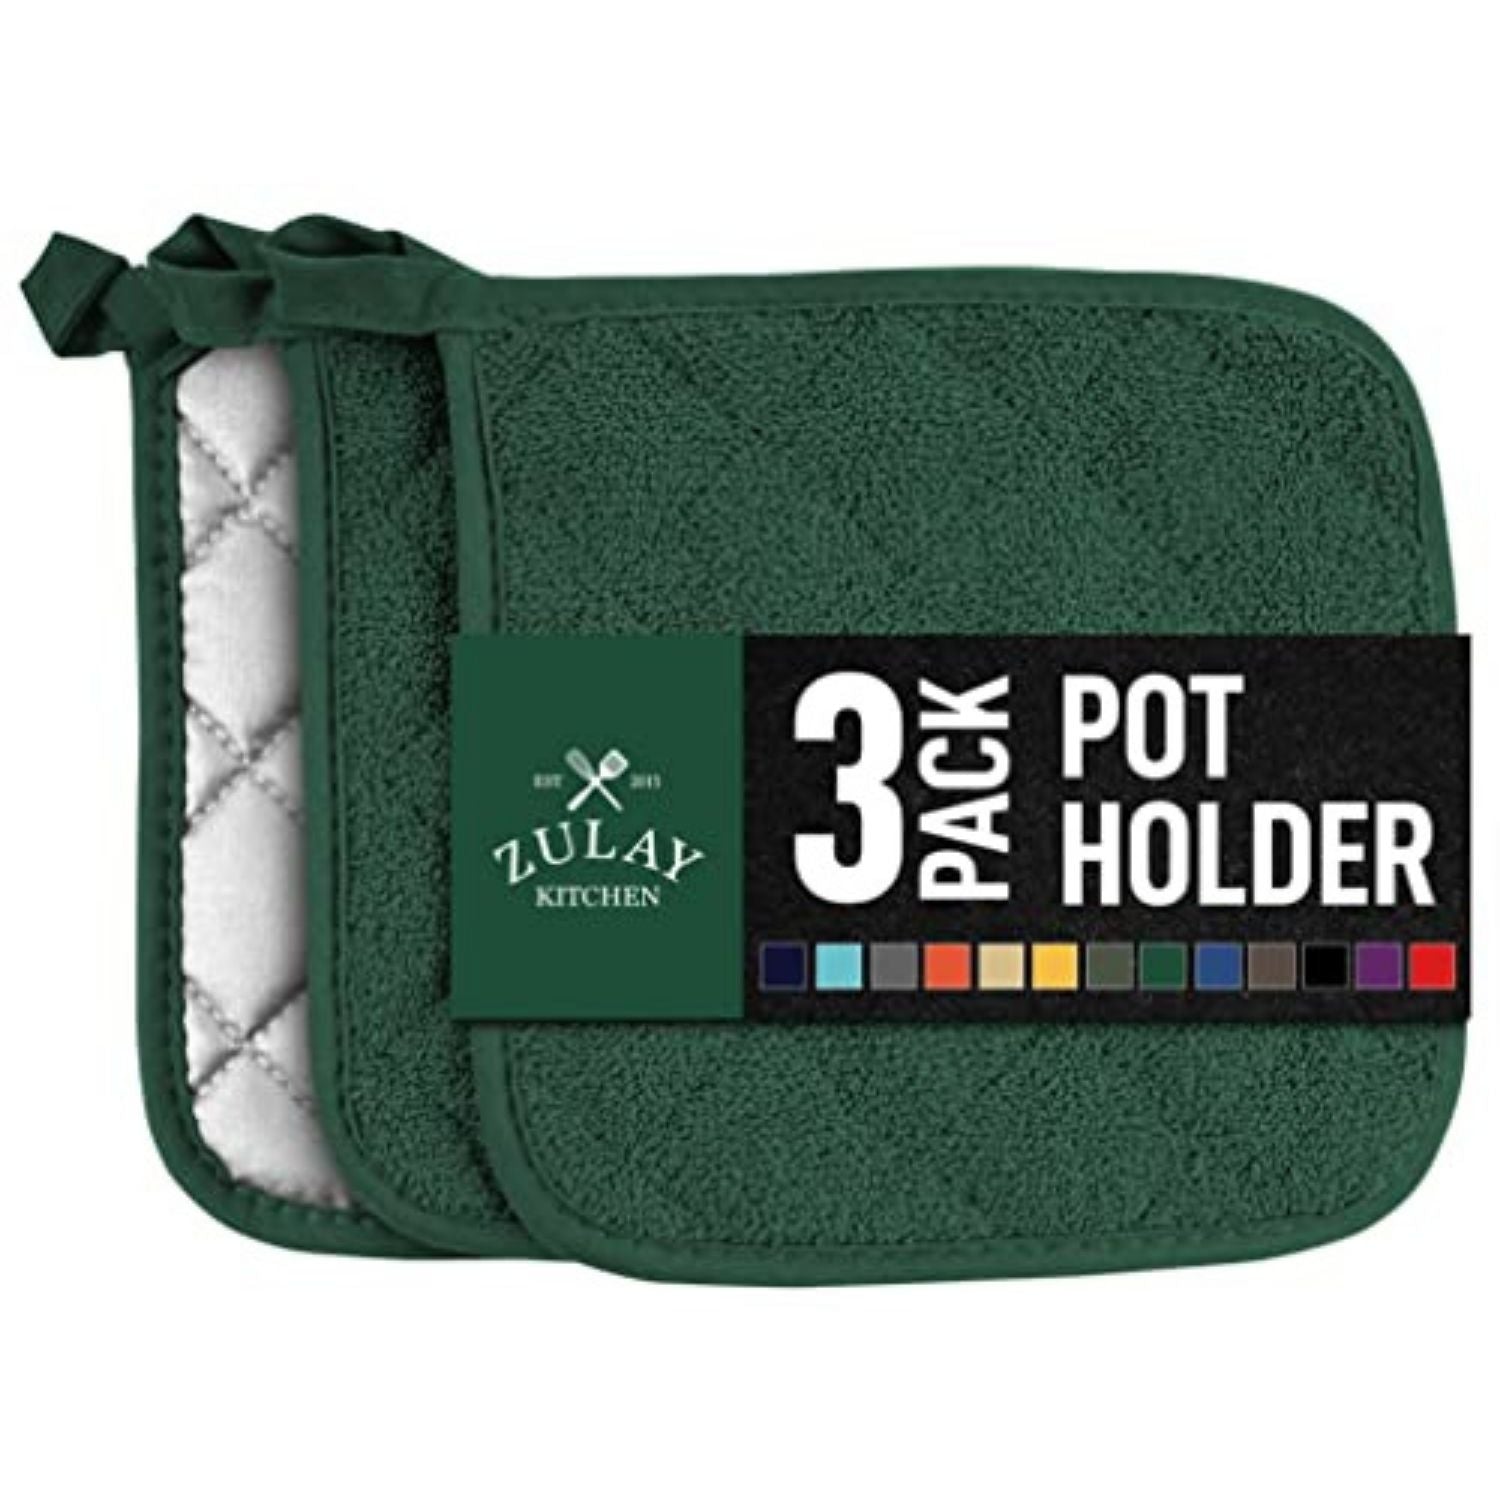 Pot Holders Set - 3 Pack Quilted Terry Cloth Potholders 7x7 Inch